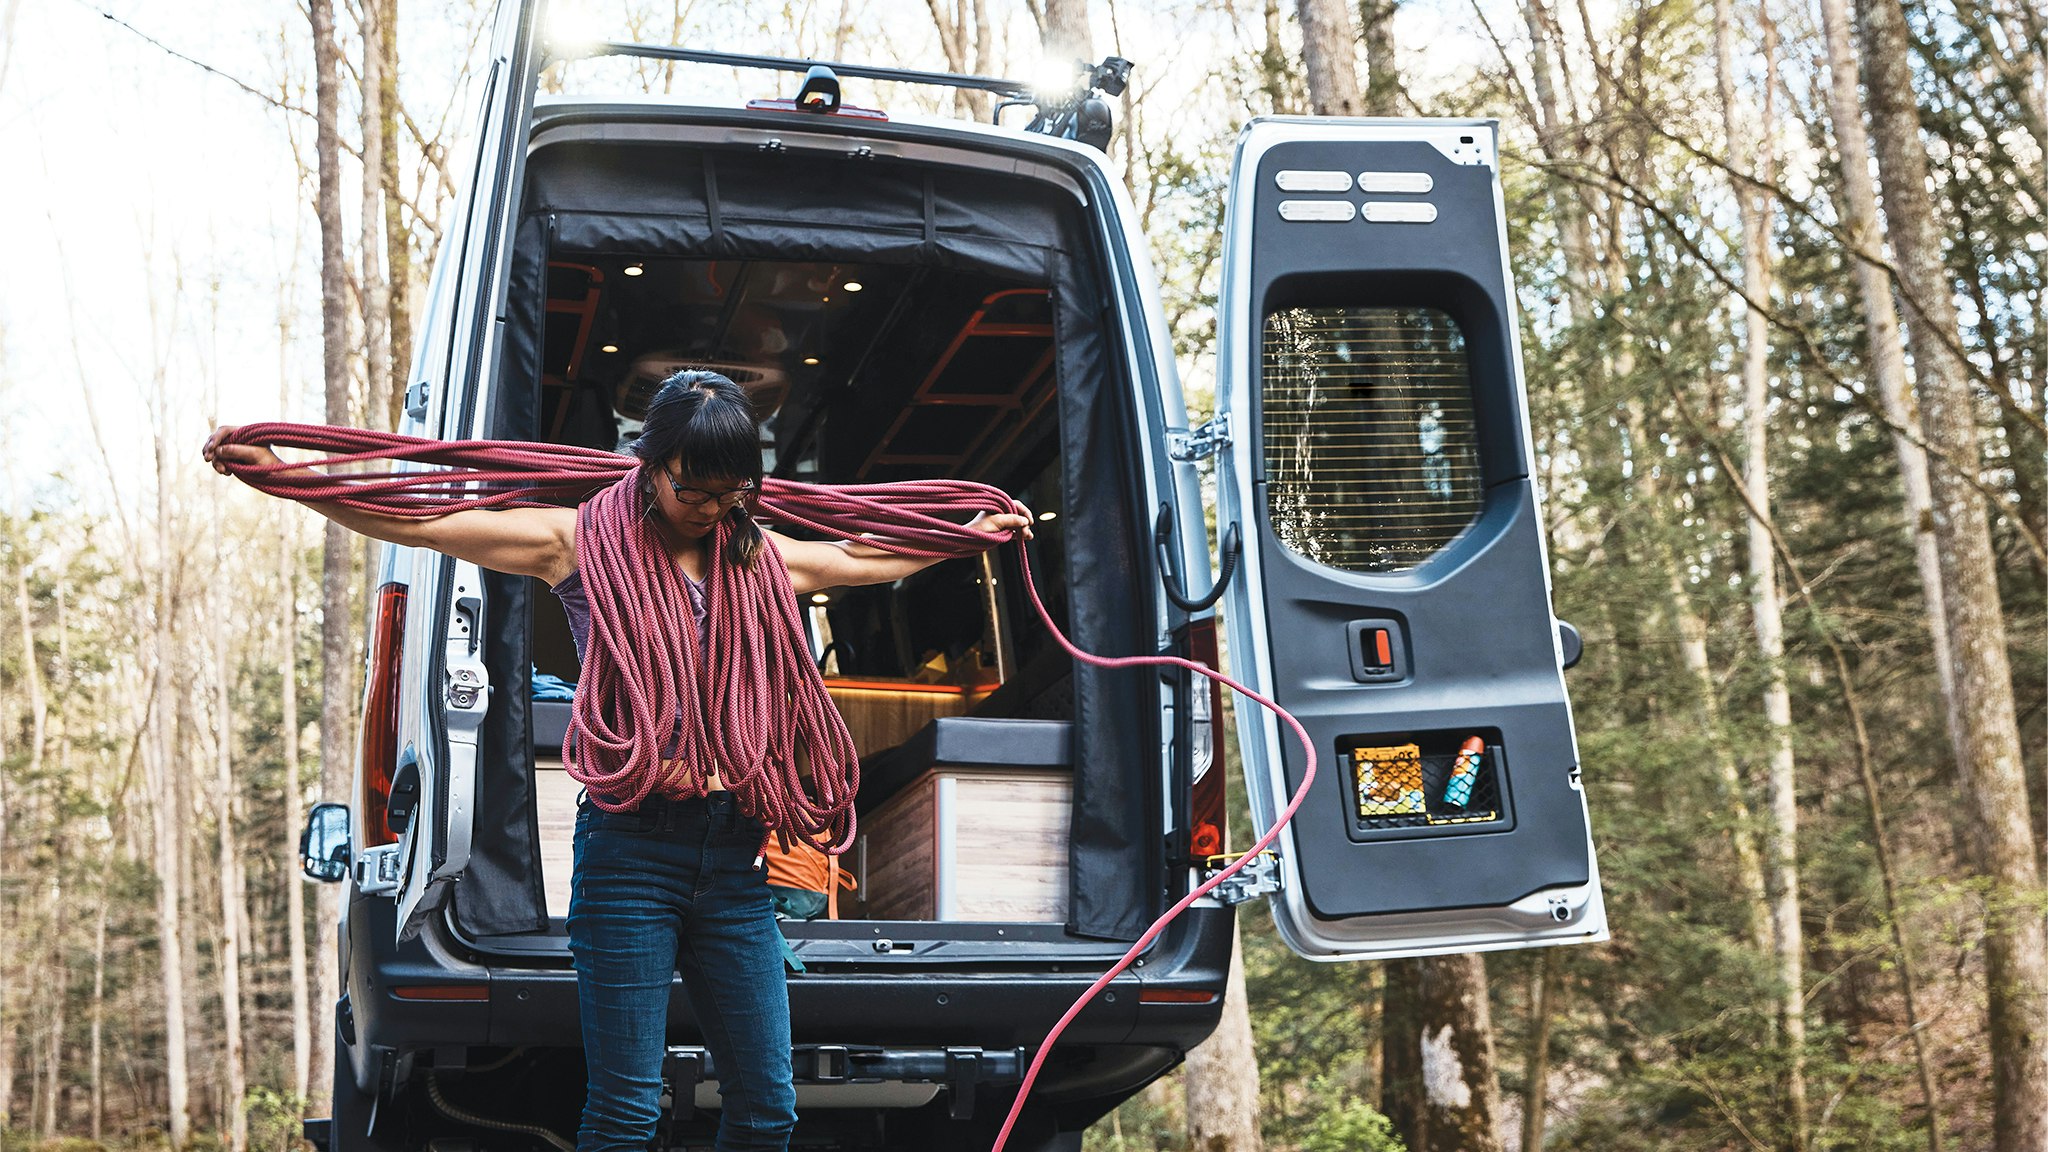 A woman getting her rope ready for a climb with her gear in her Airstream 24X Class B Motorhome in West Virgina